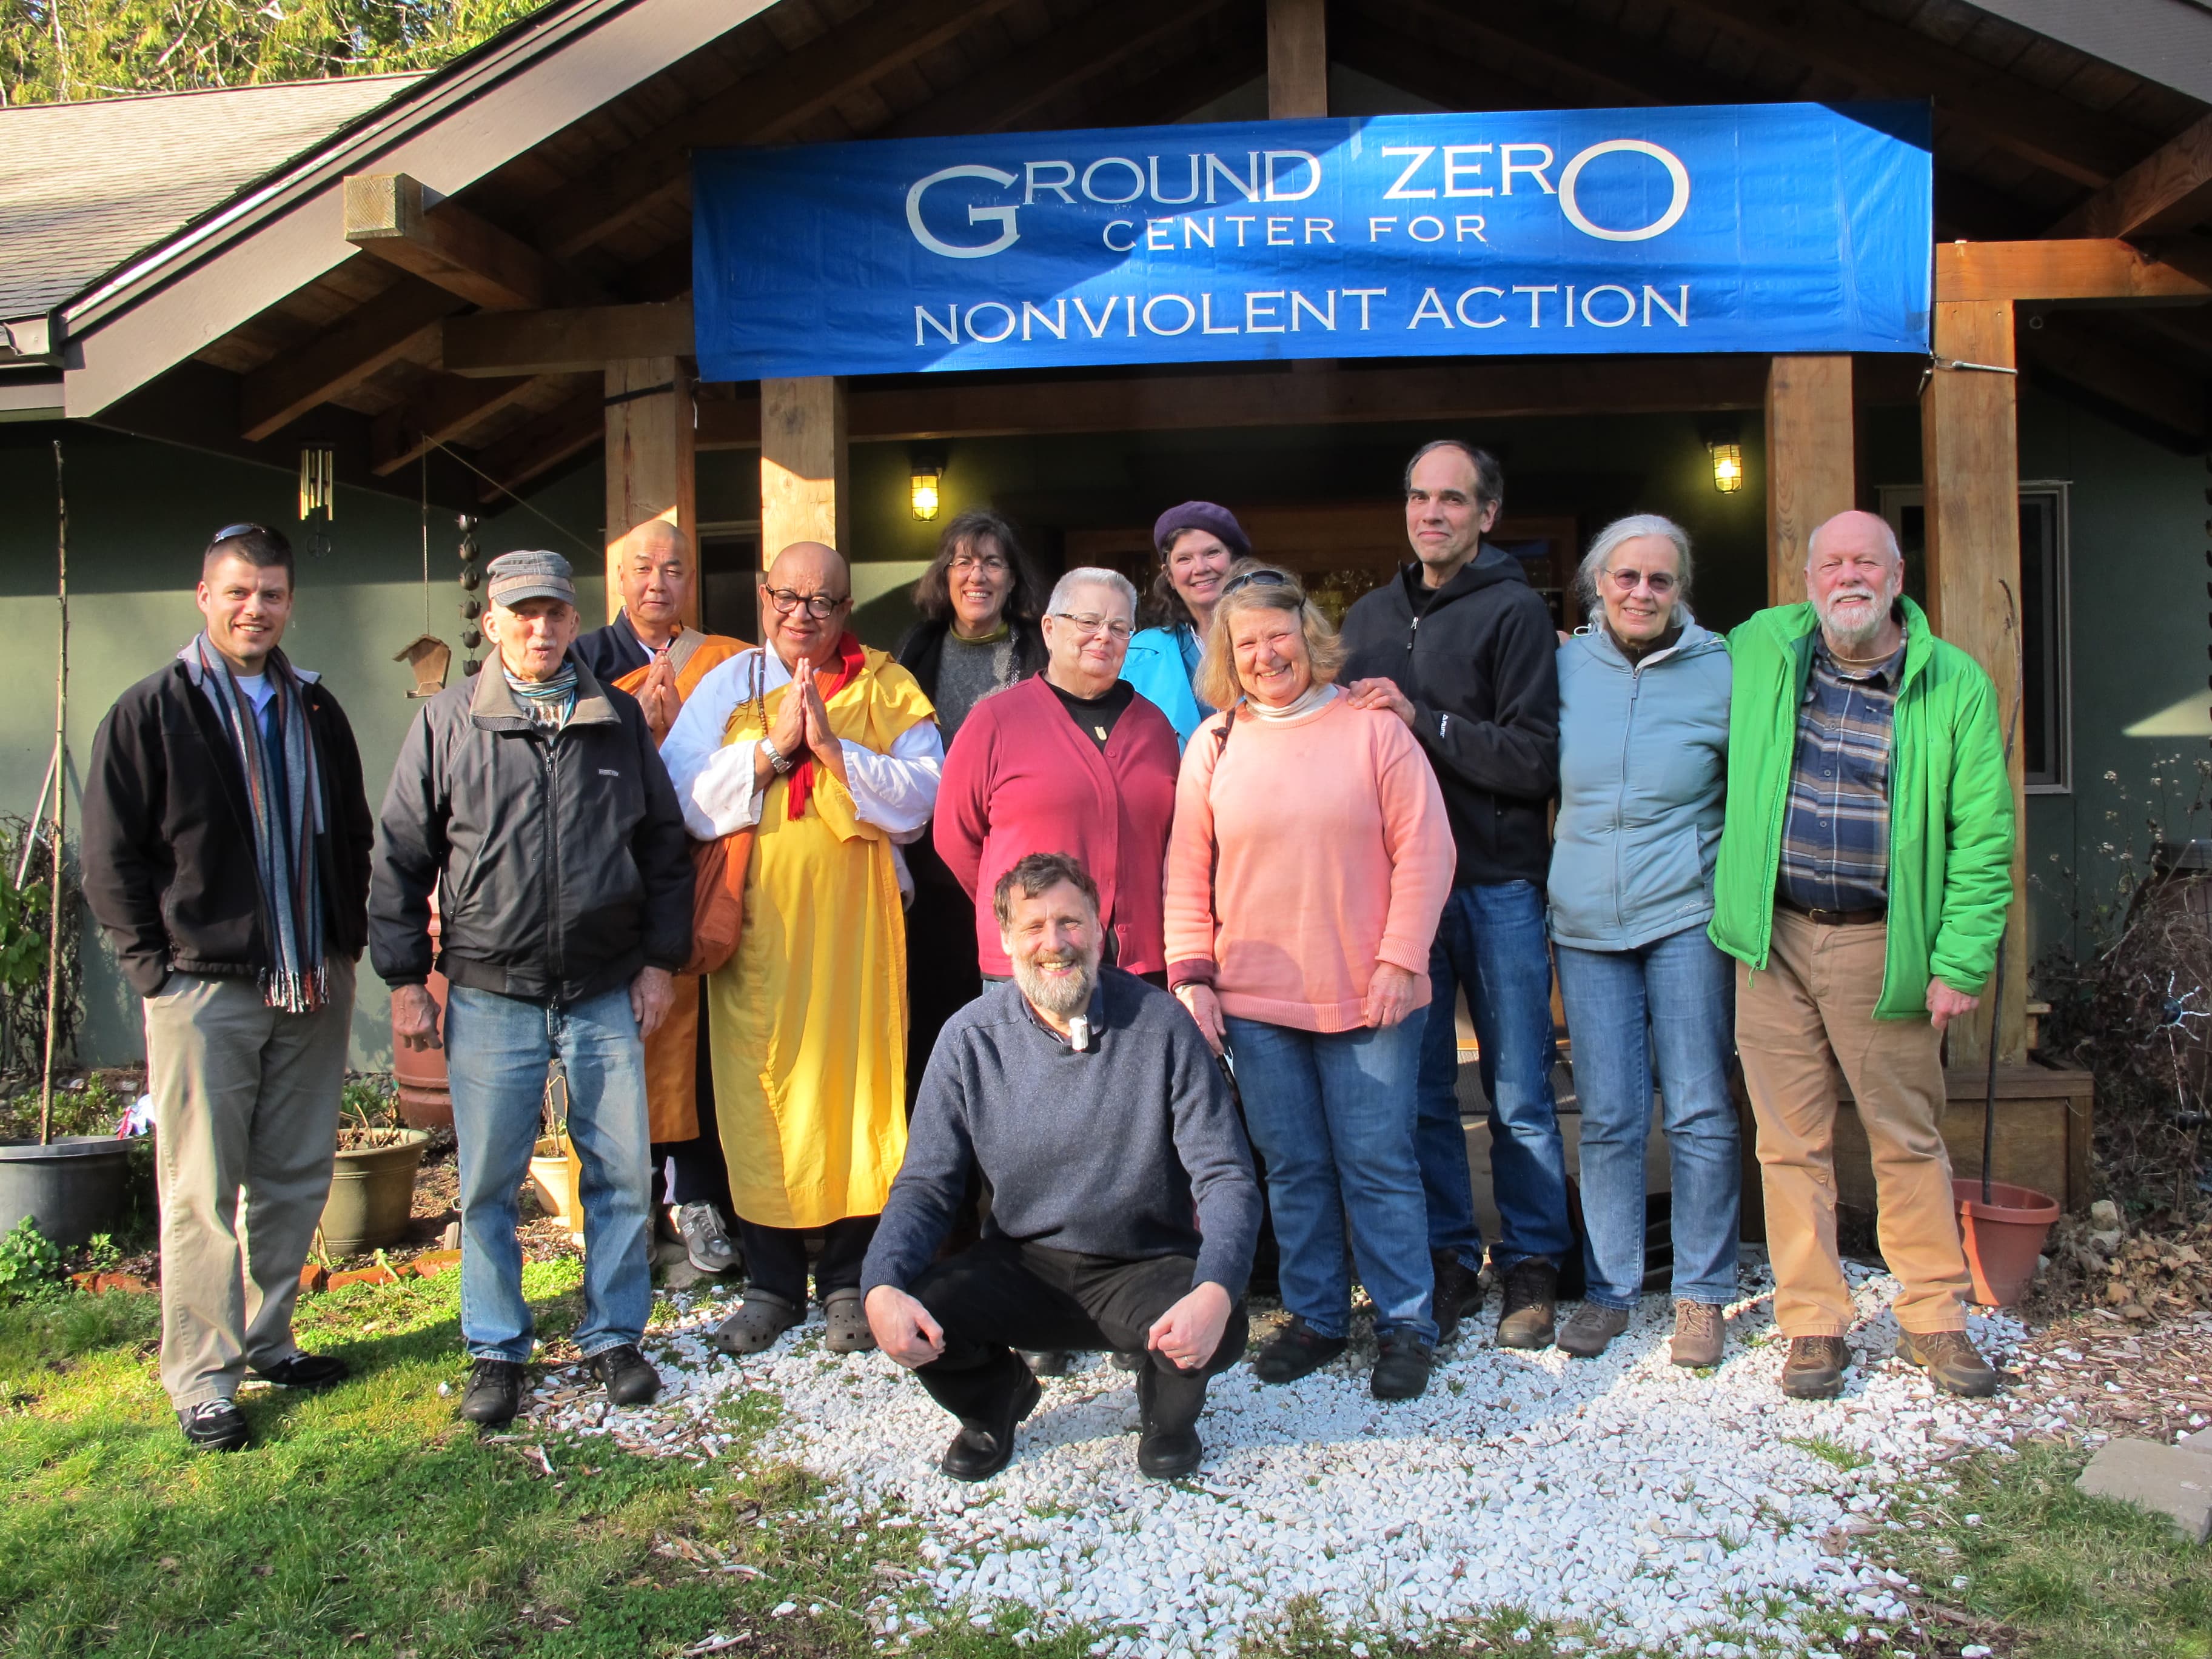 Learn More – Ground Zero Center for Nonviolent Action